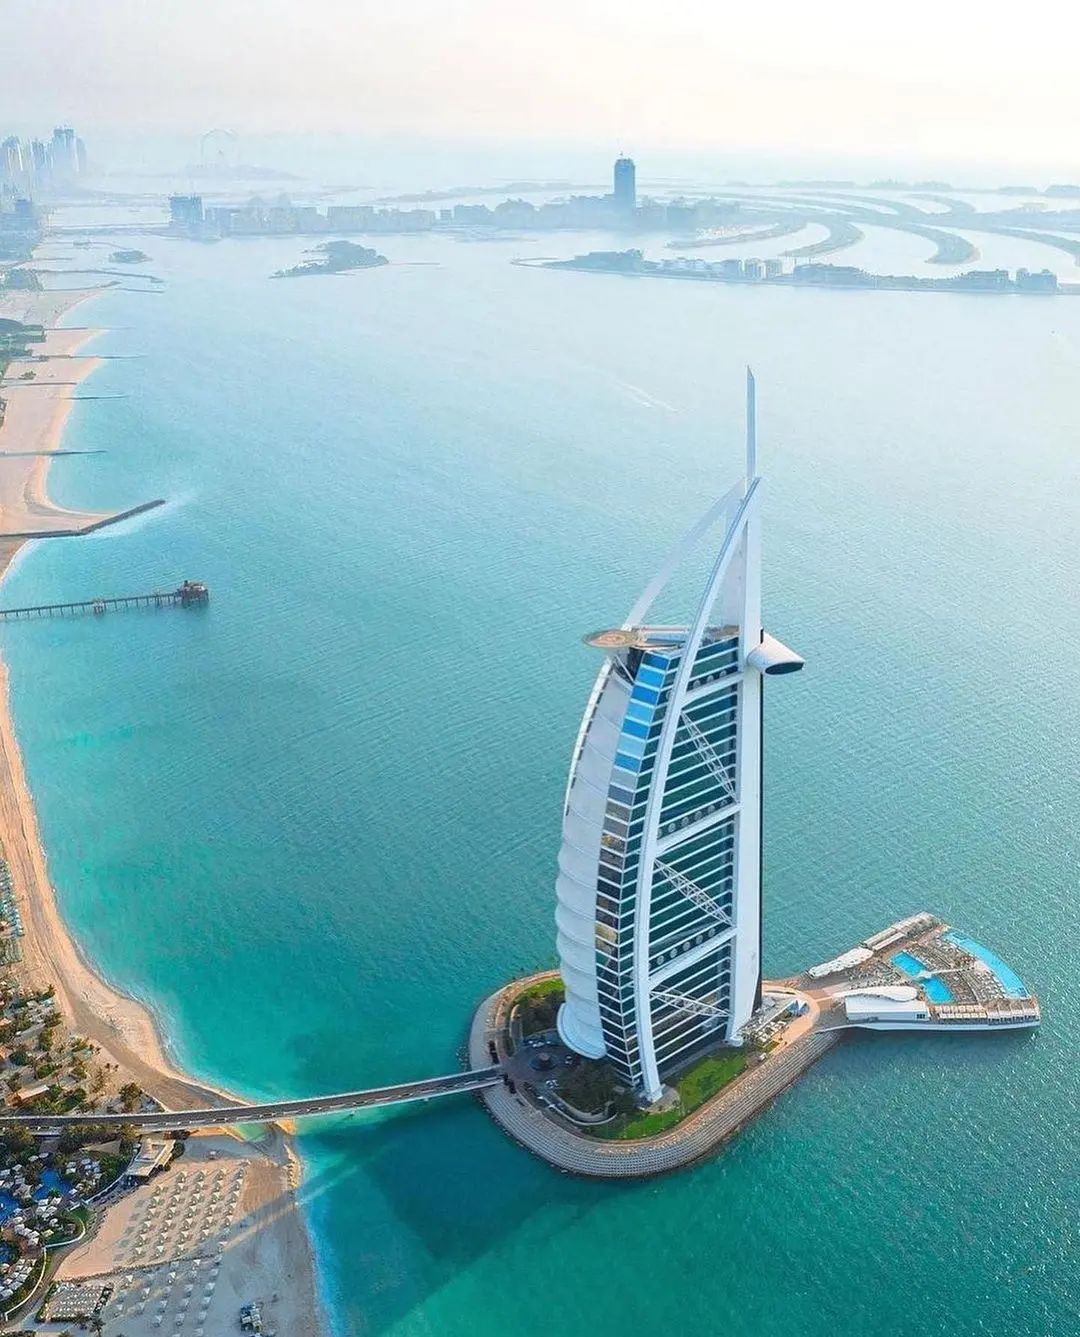 An aerial view of the iconic Burj Al Arab luxury hotel on its own man-made island in Dubai, its distinctive sail-shaped silhouette towering over the coastline at sunrise.